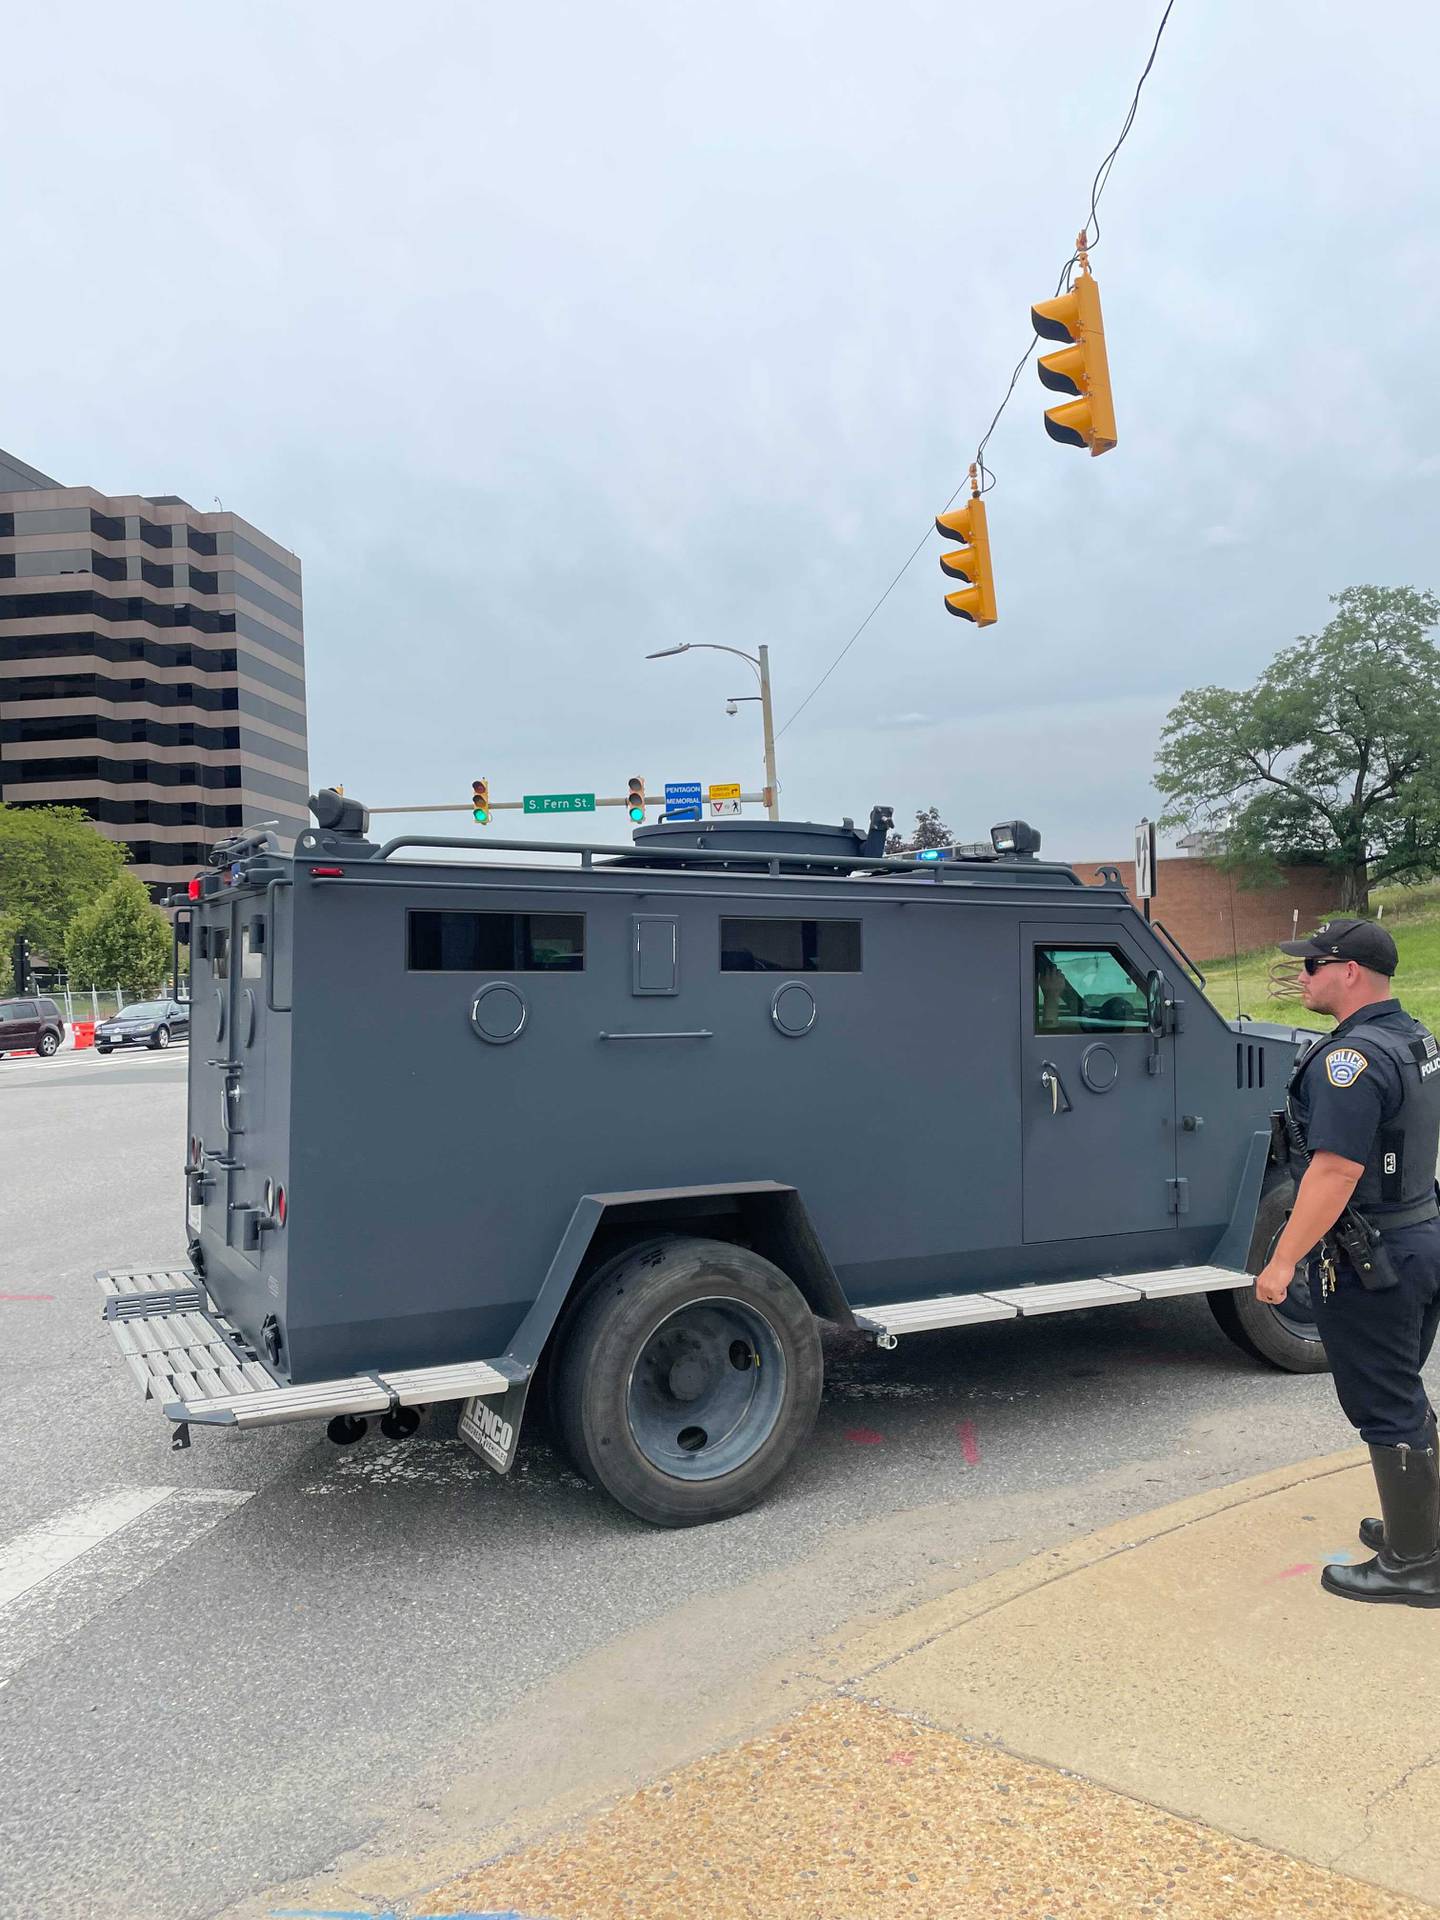 An armoured vehicle responds outside the Pentagon on August 3, 2021 after multiple gunshots were fired near an entrance to the building. Bryant Harris /The National